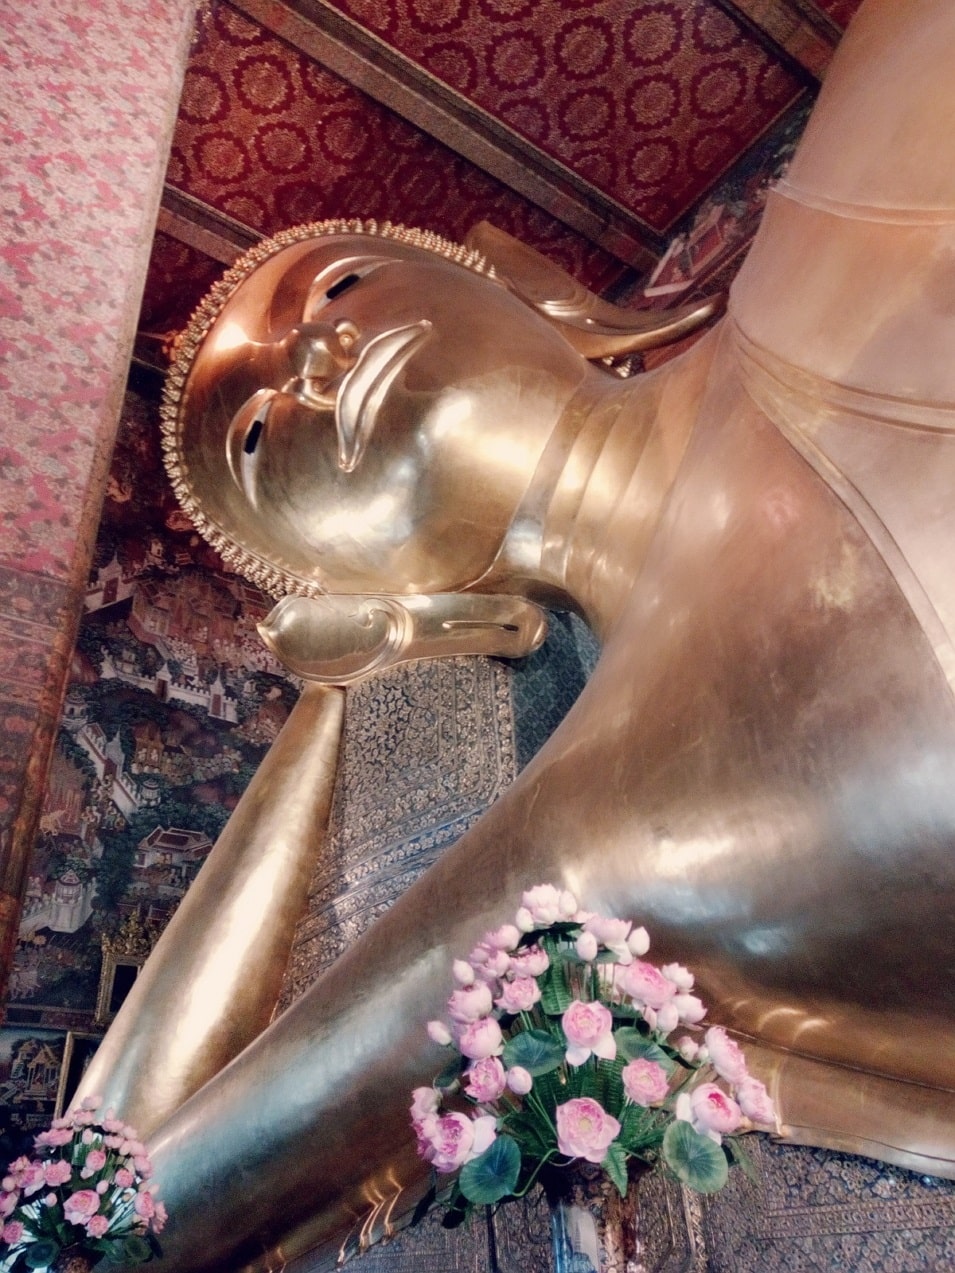 A Gorgeous Temple Wat Pho beautiful decorated of Golden Buddha.